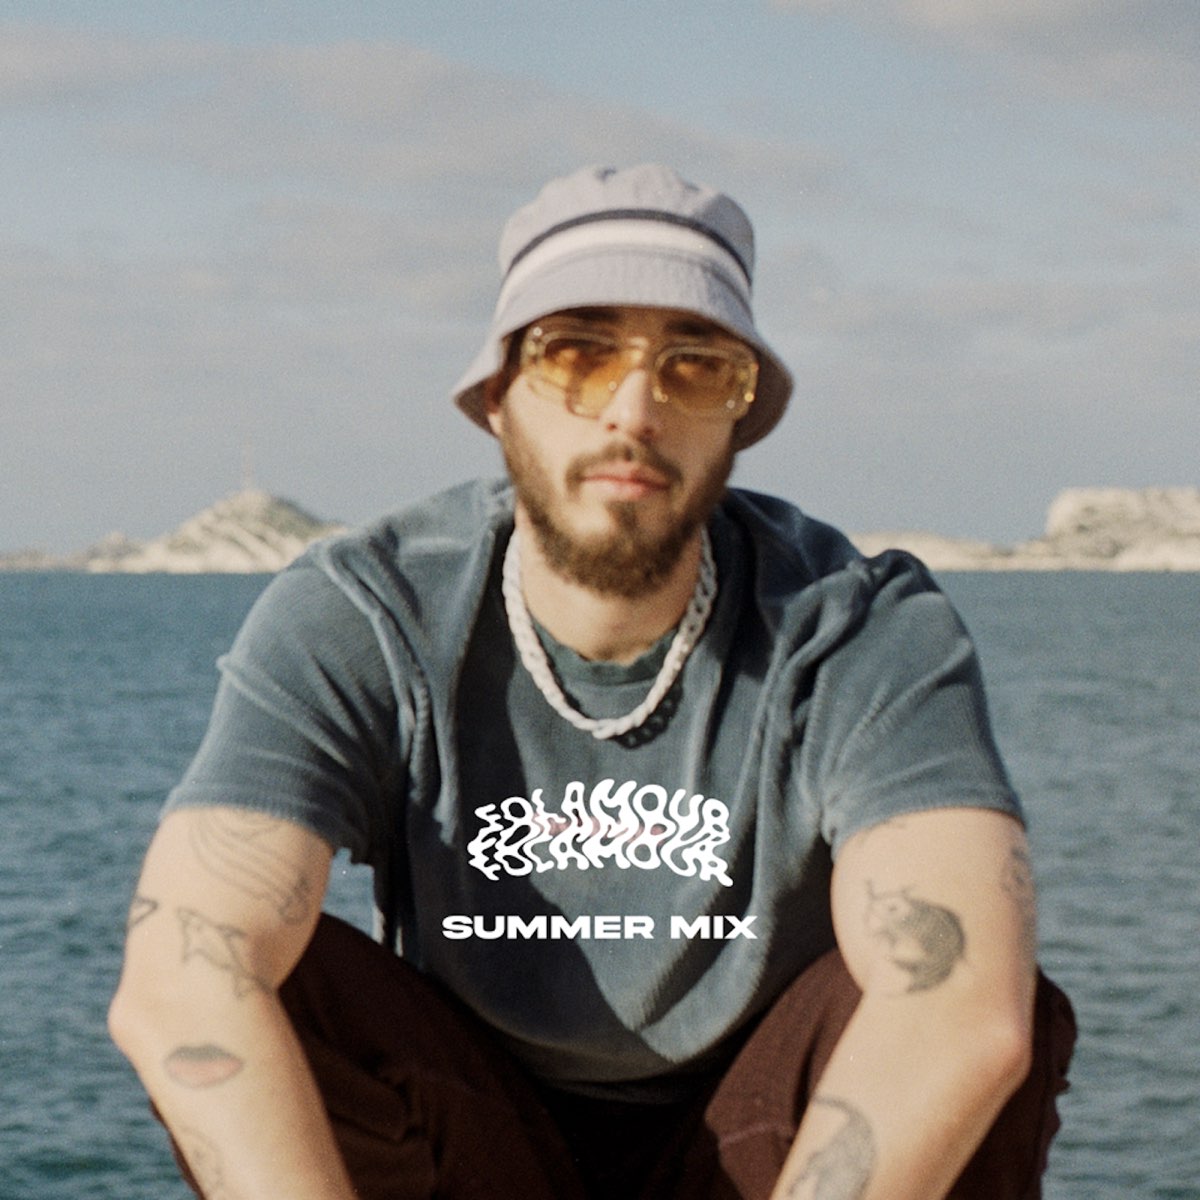 ‎Summer Mix 2022 (DJ Mix) by Folamour on Apple Music